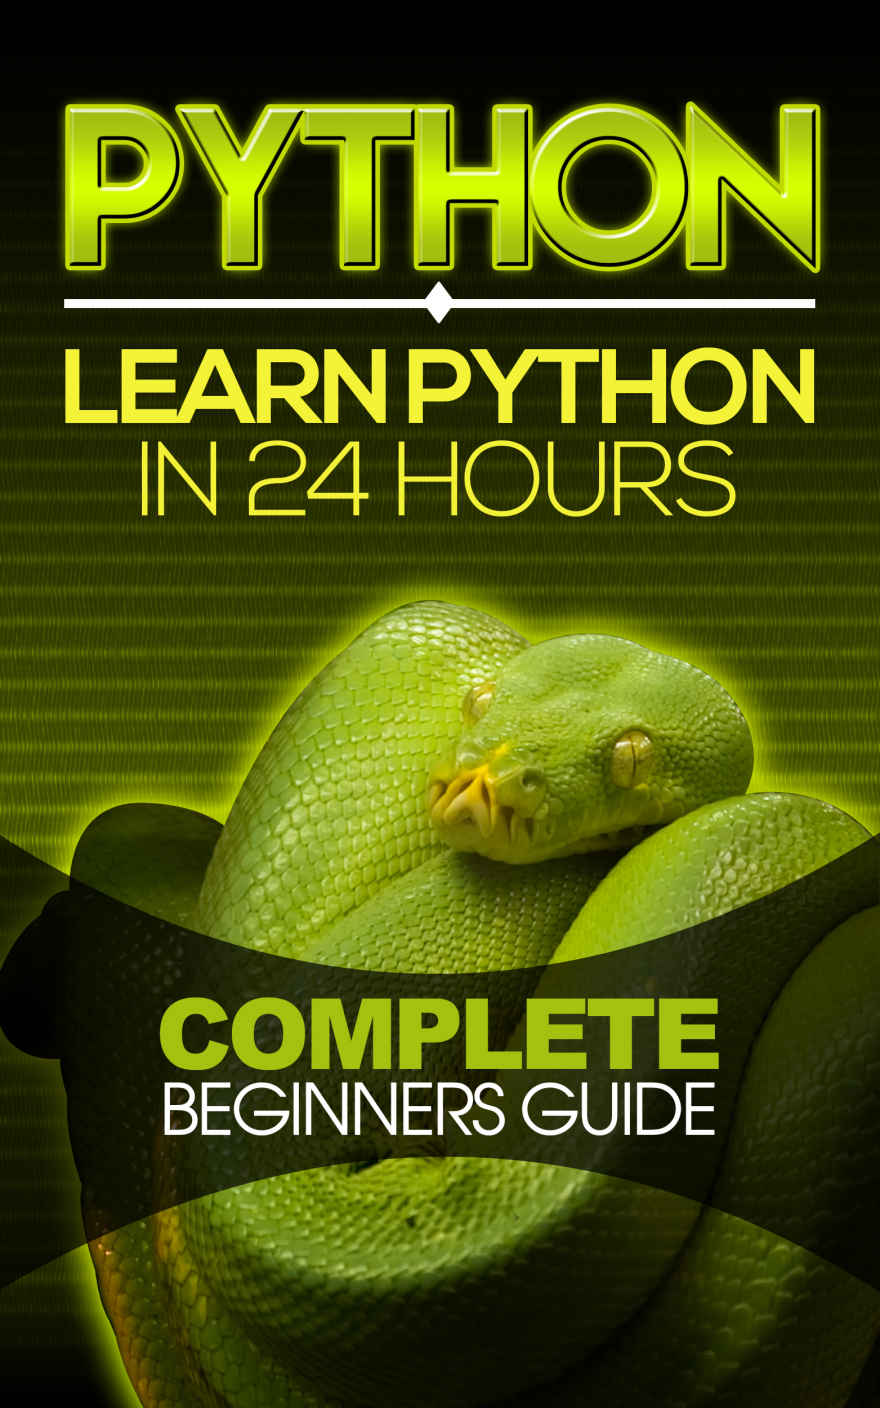 Python: Learn Python in 24 Hours: Complete Beginners Guide